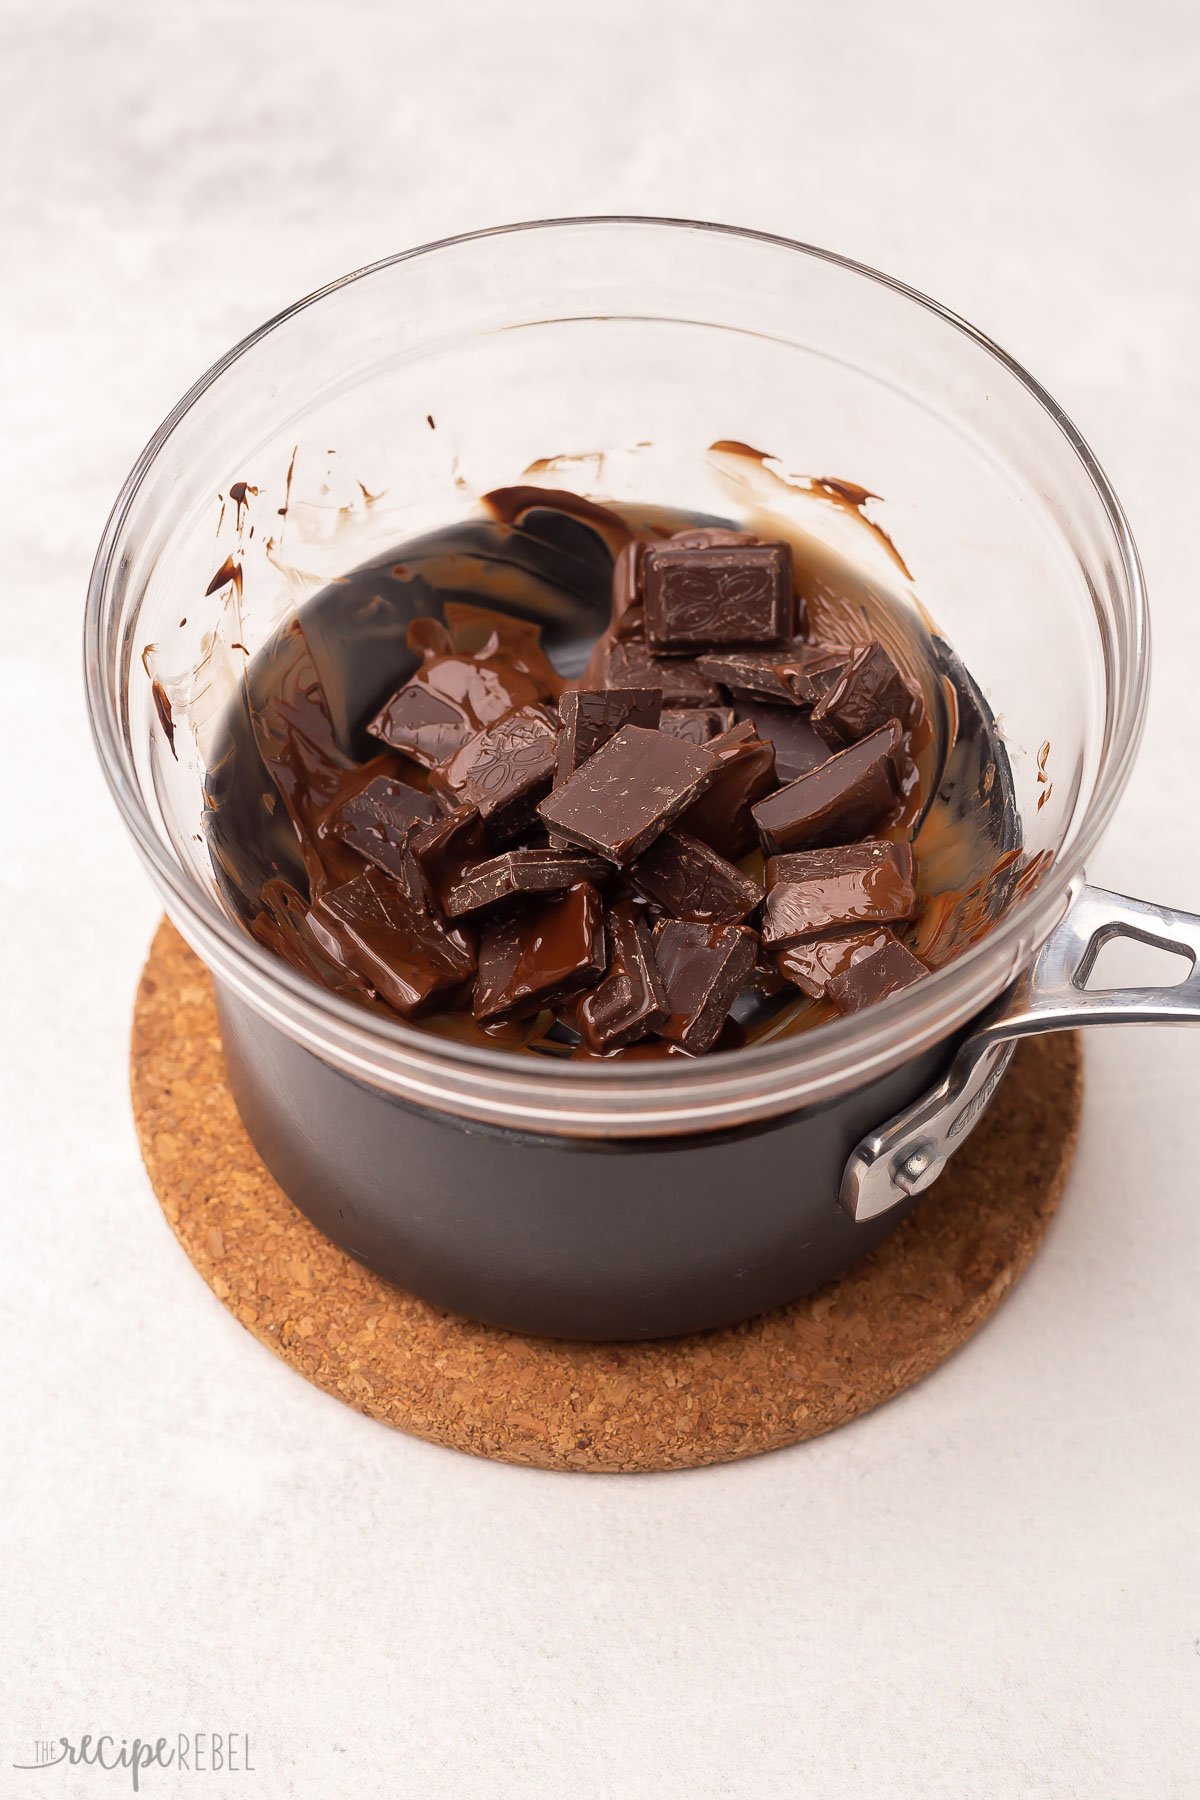 Chocolate melting in a glass bowl over a pot of hot water.